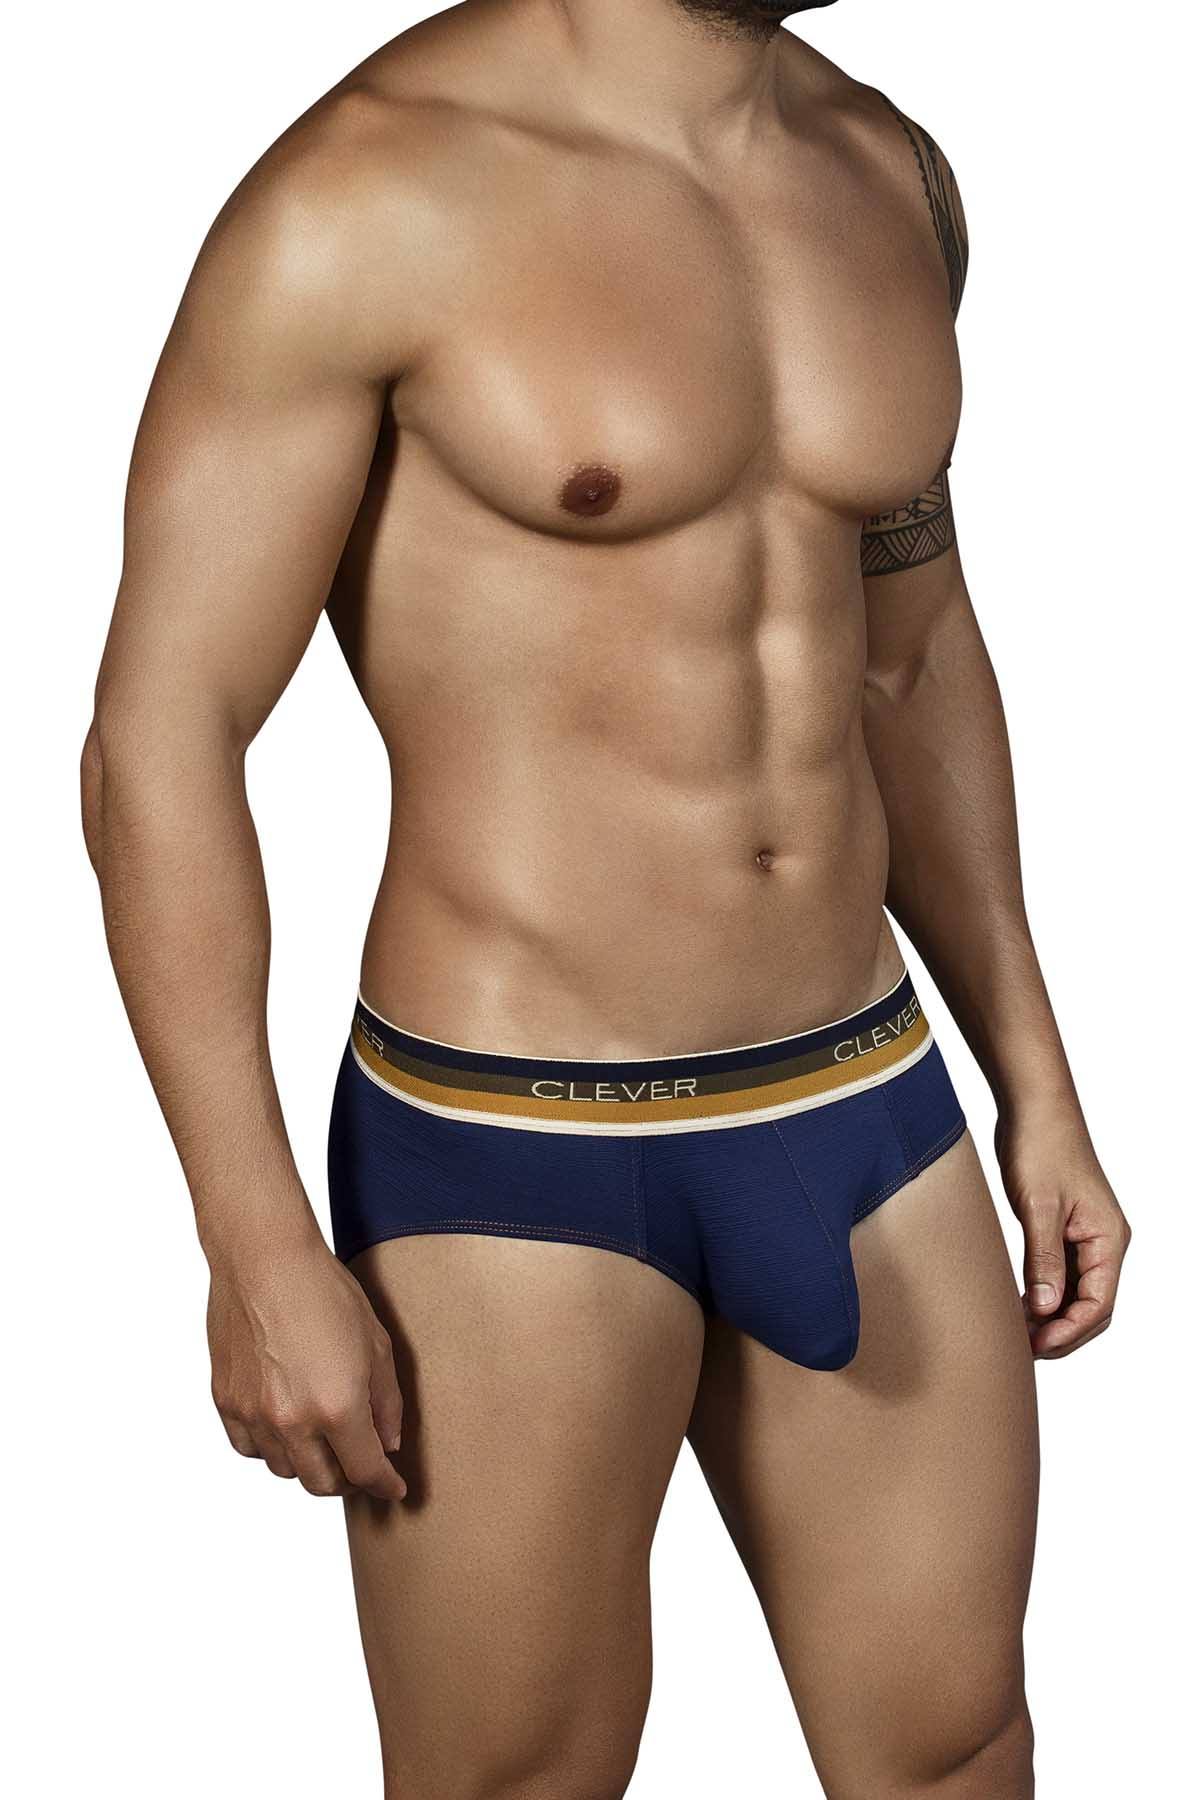 Clever Navy-Blue Lines Latin Brief